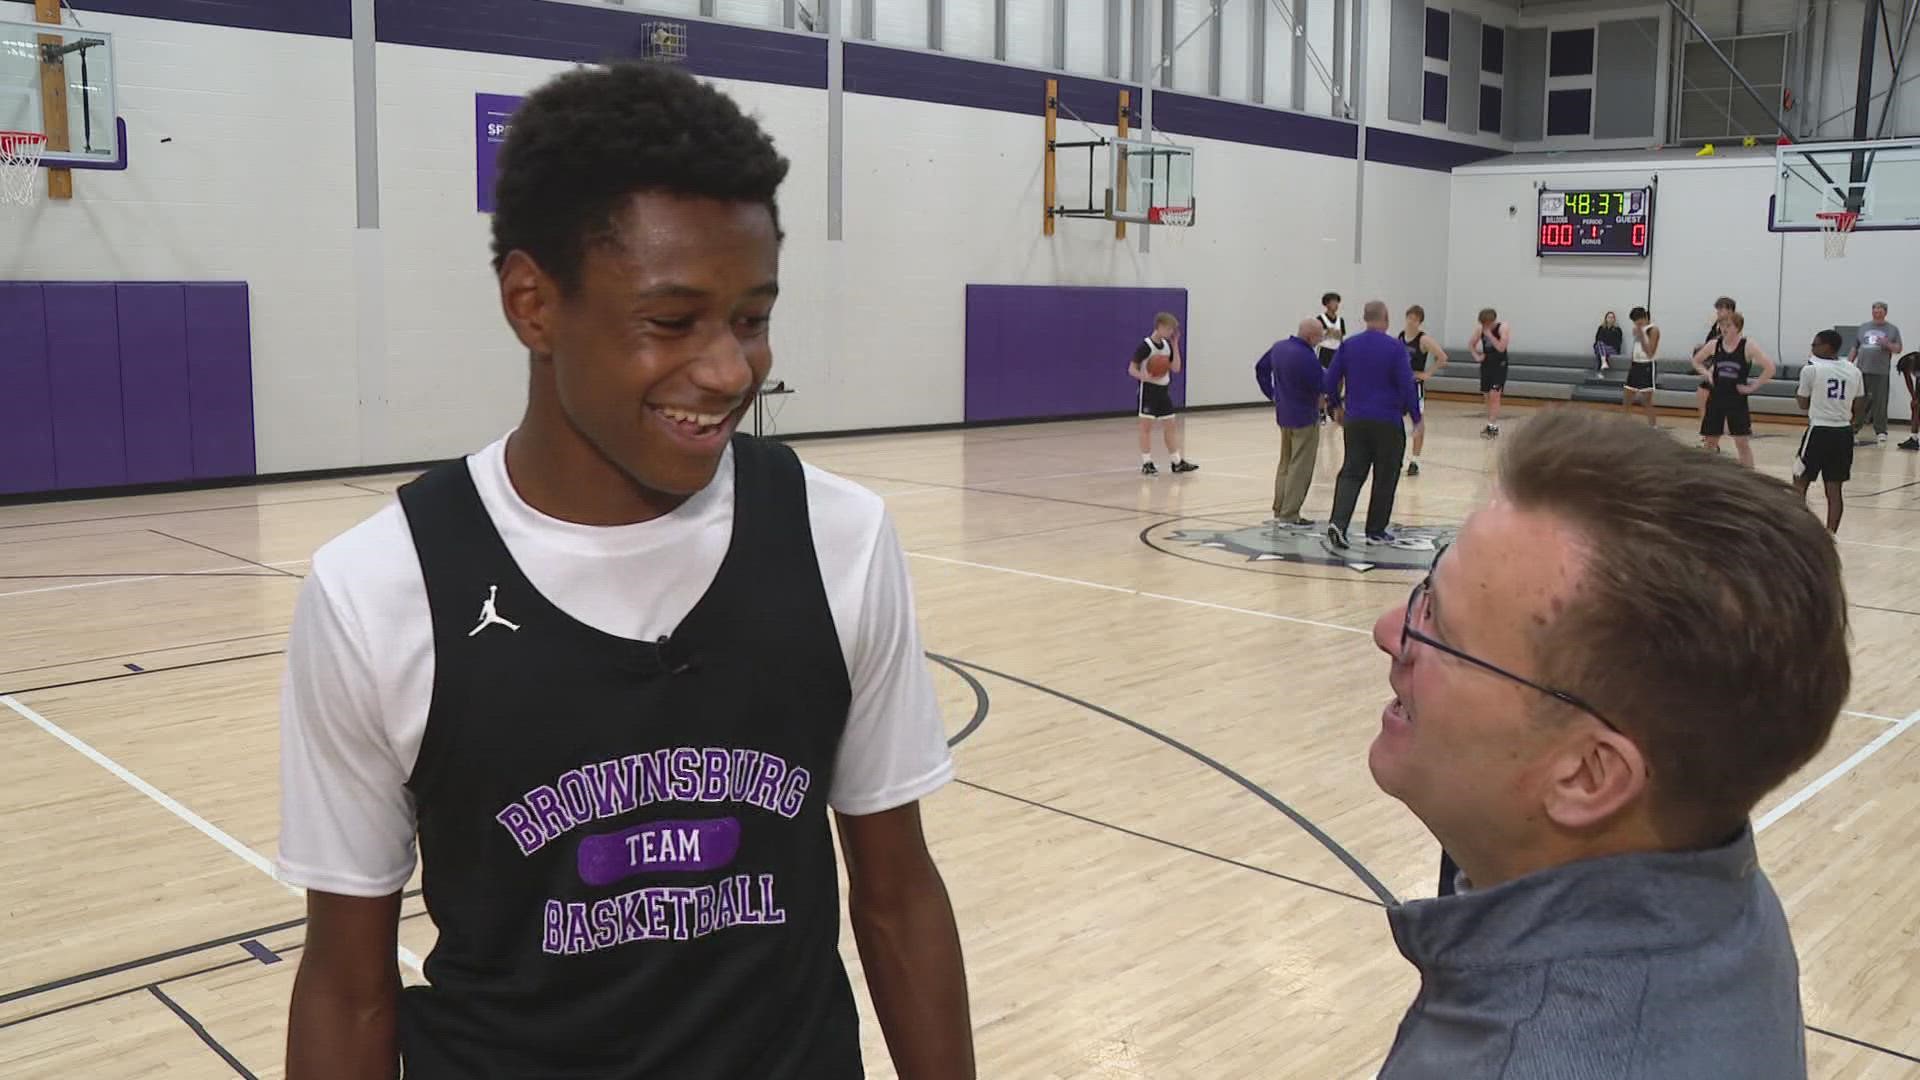 Catchings hopes to help lead his hometown Brownsburg Bulldogs to a state title.